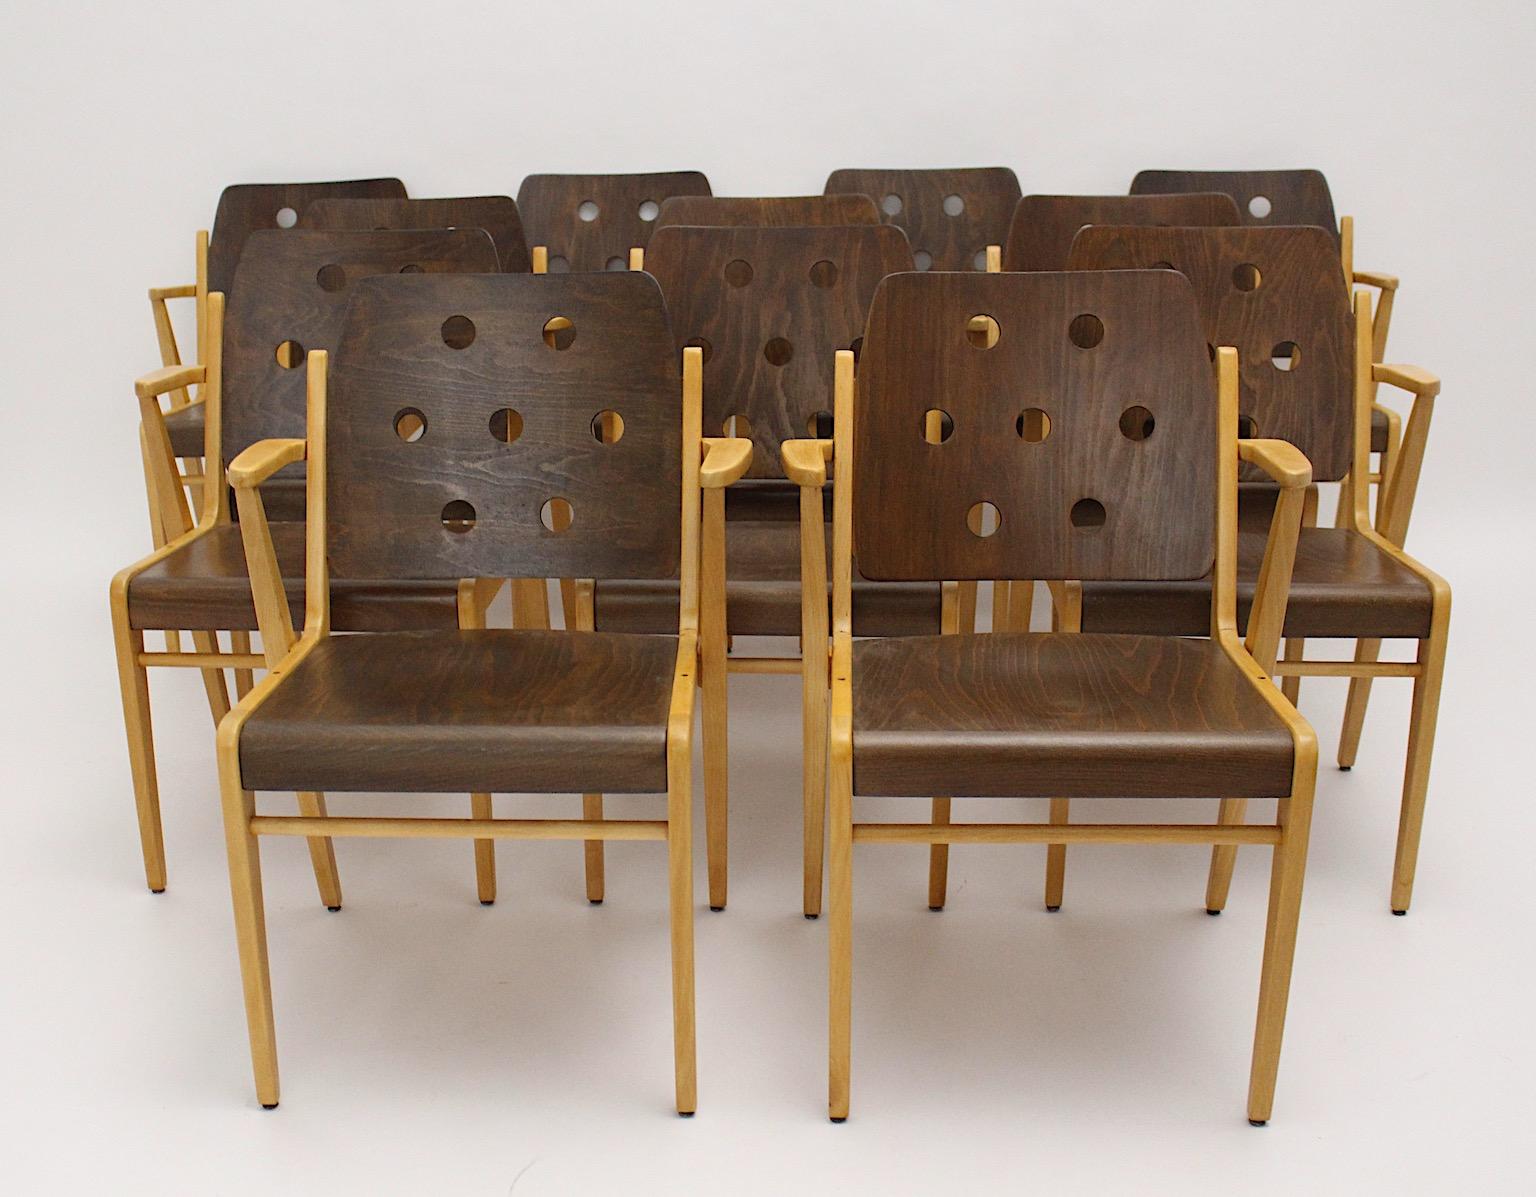 Mid-Century Modern vintage set of 12 dining chairs from beechwood designed by Franz Schuster Vienna 1950s and executed by Wiesner Hager.
The frame of these amazing dining chairs with armrests, which are also stackable, from solid natural beech